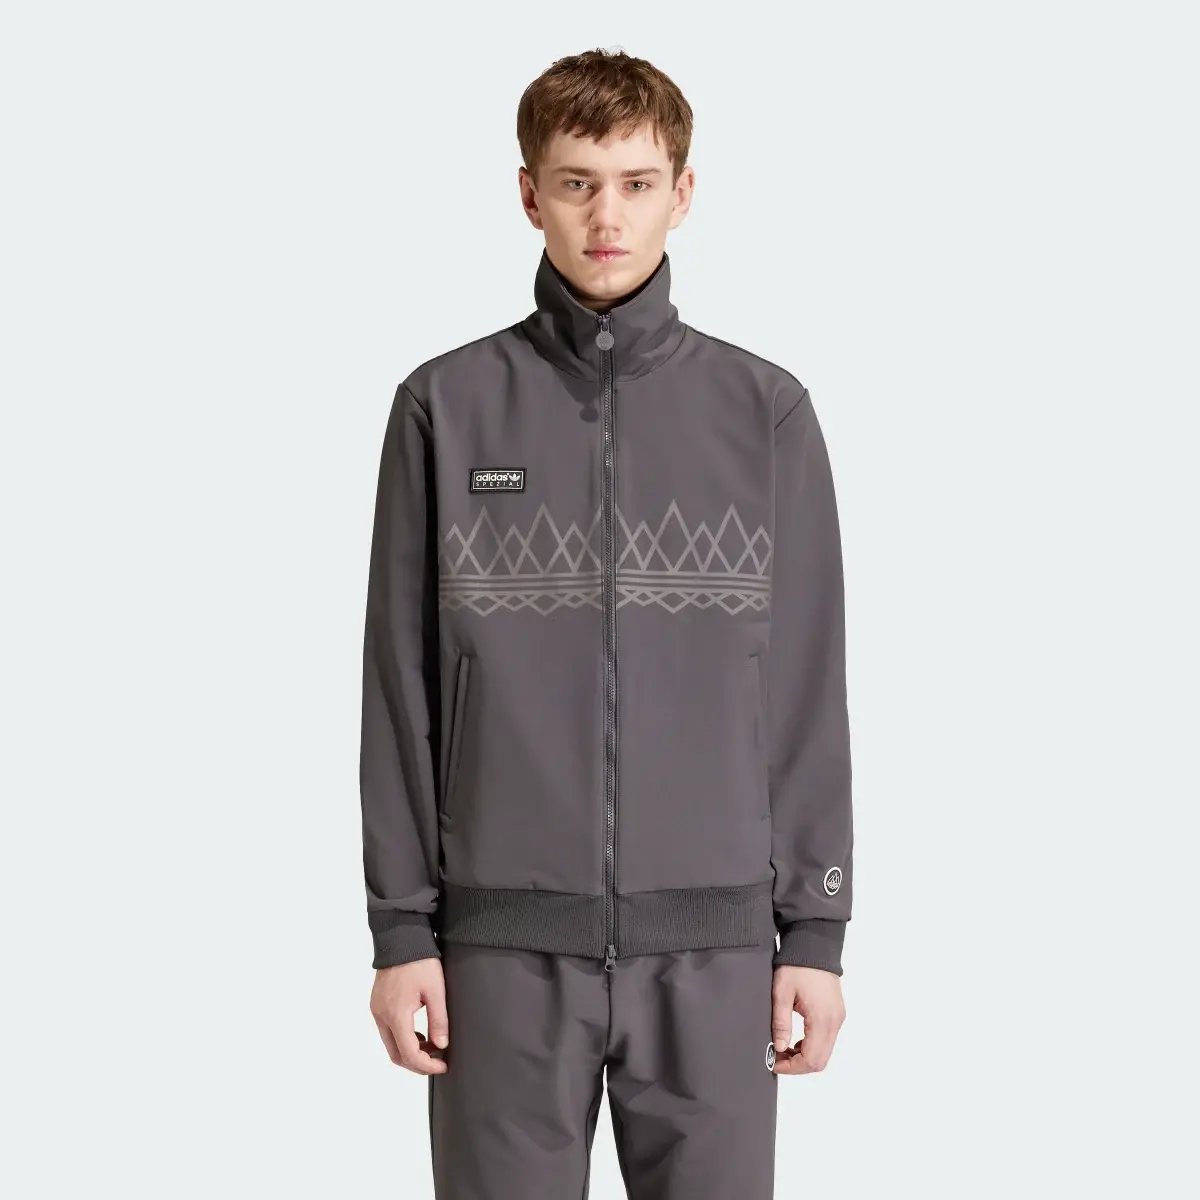 Adidas Suddell Track Top. 2